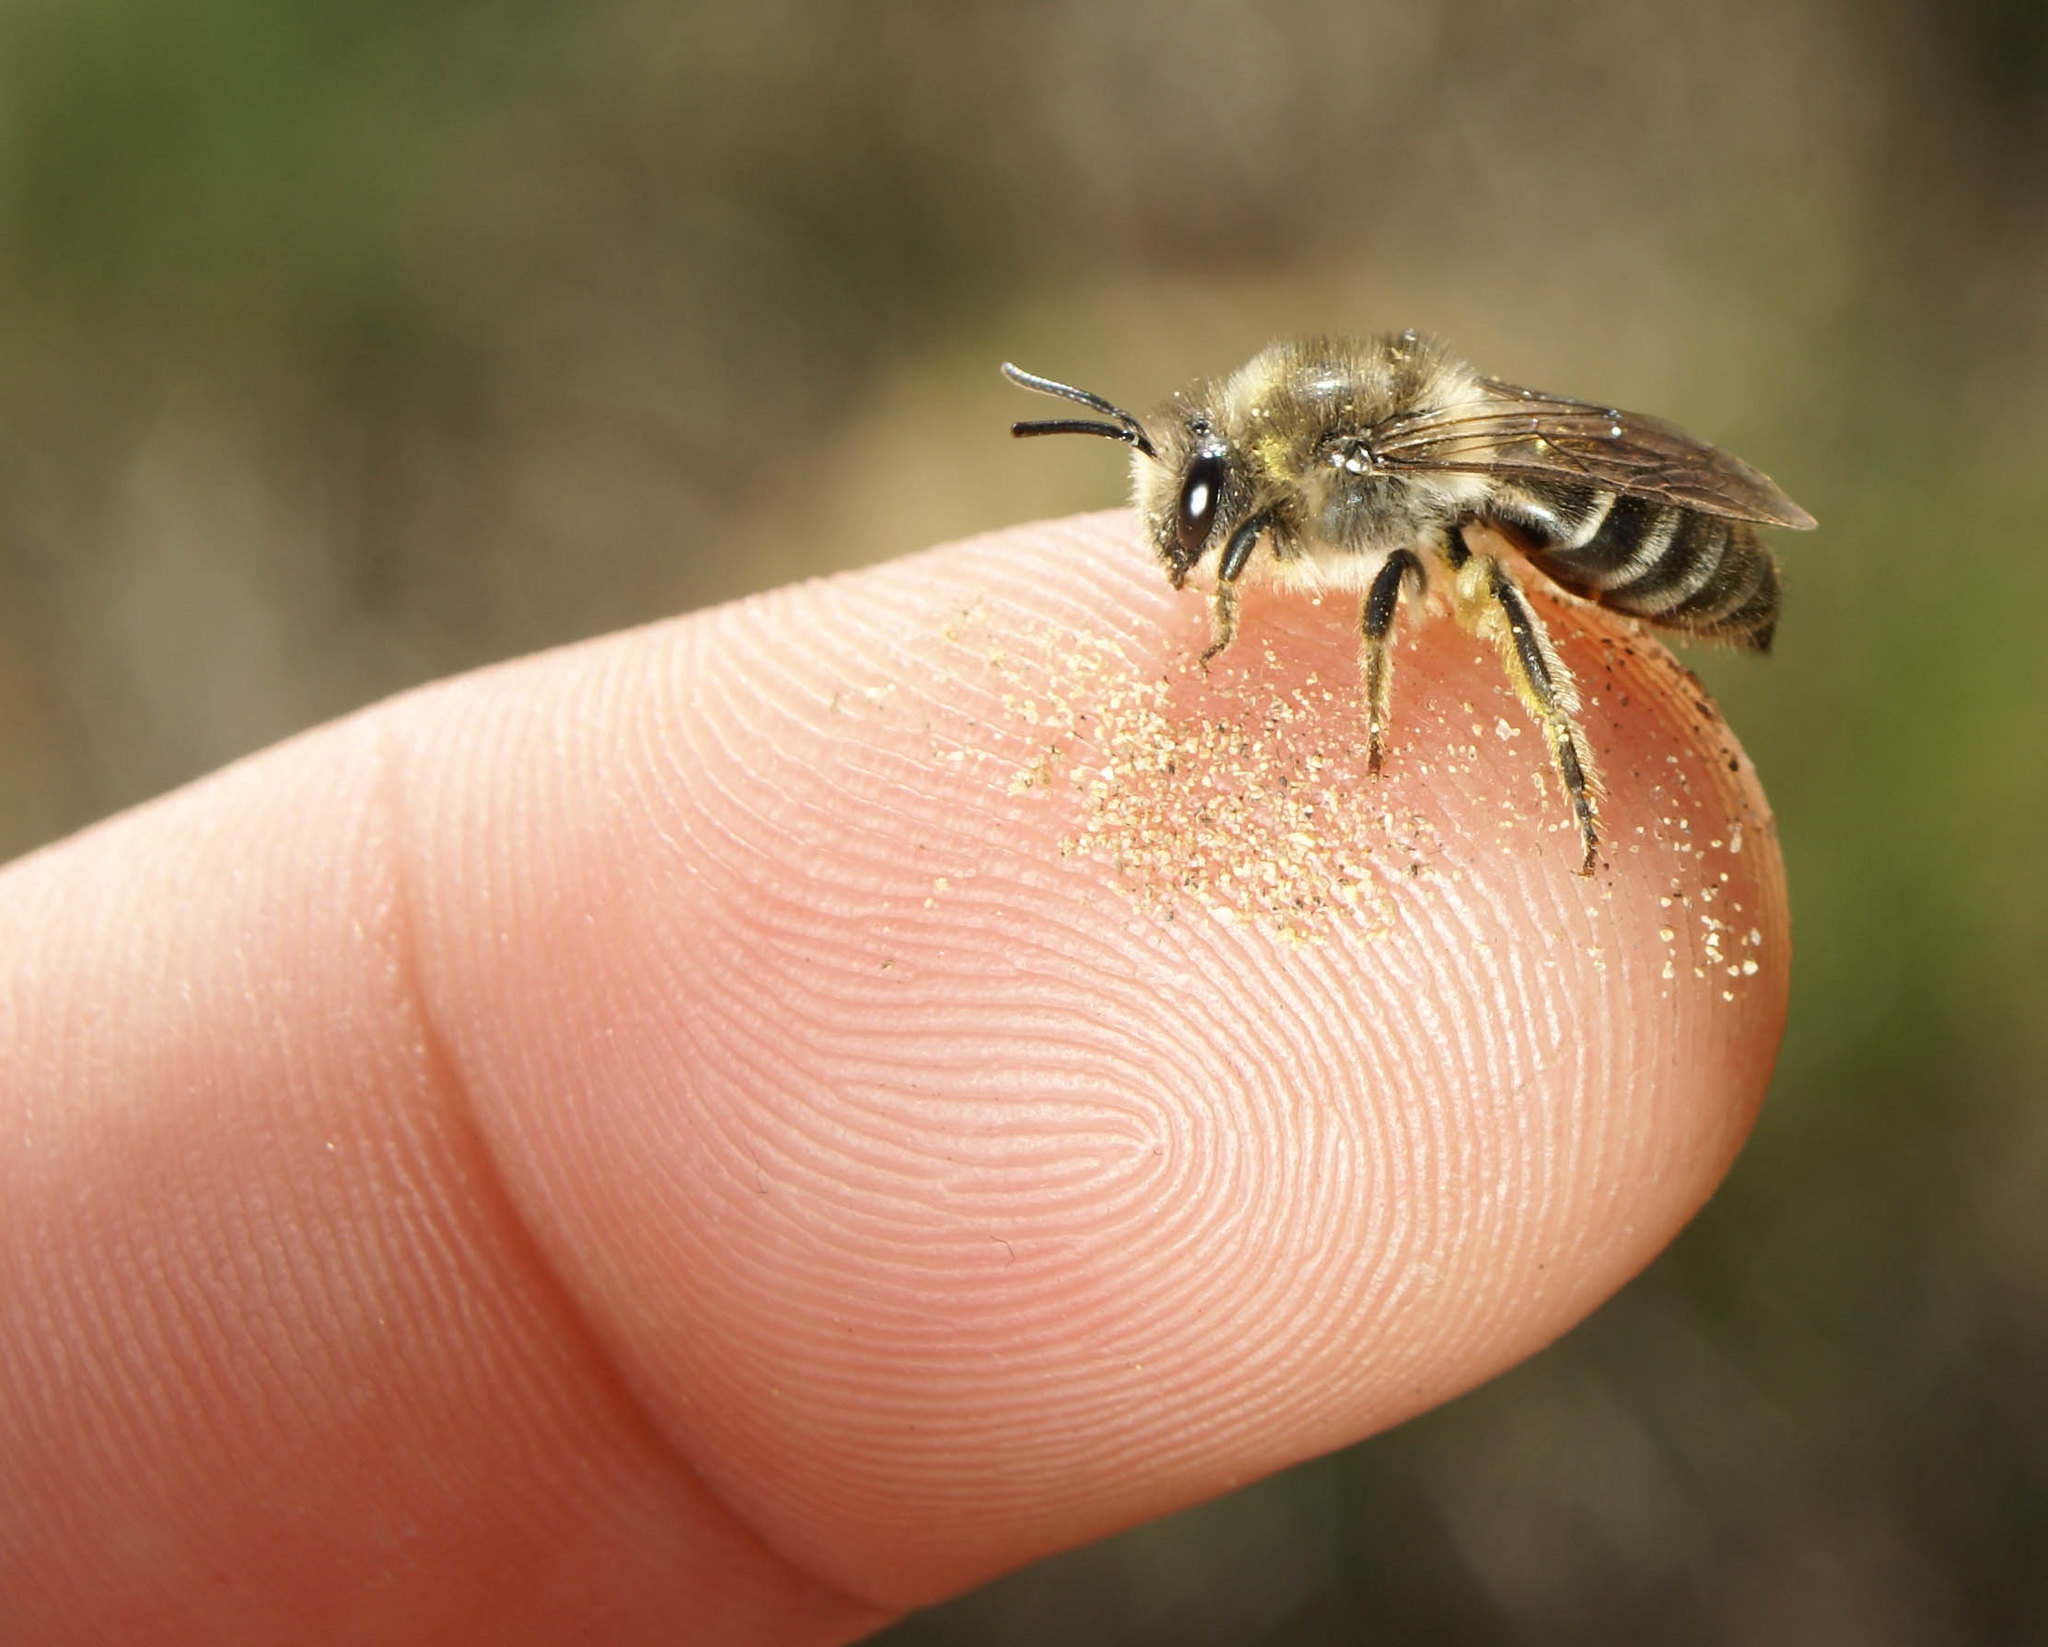 Close up image of a Colletes inaequalis bee perched on a finger